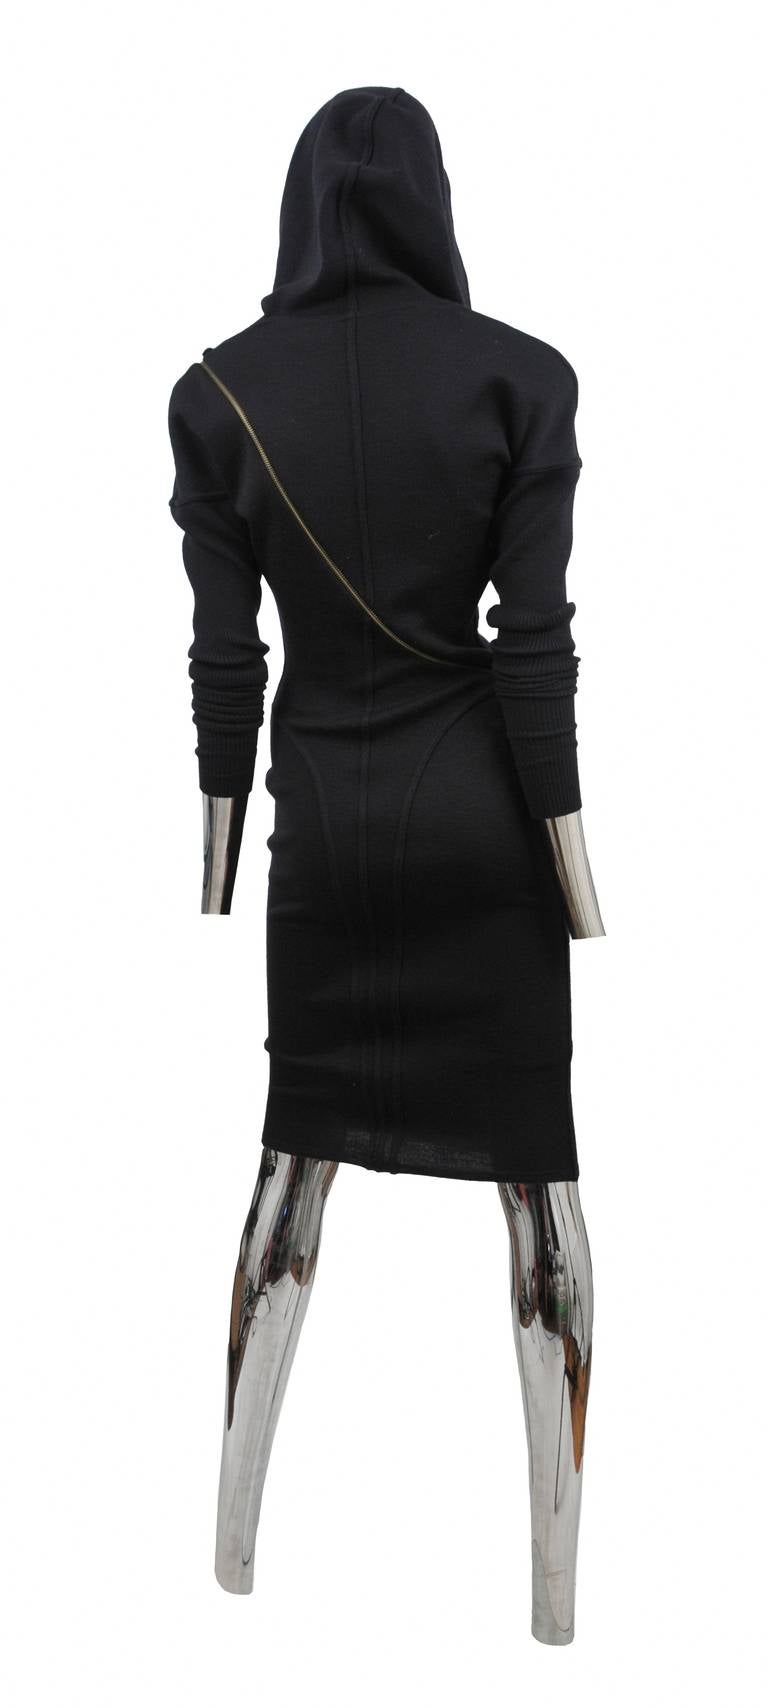 Black wool iconic zipper dress with hood and brass zipper detail that wraps around the body.